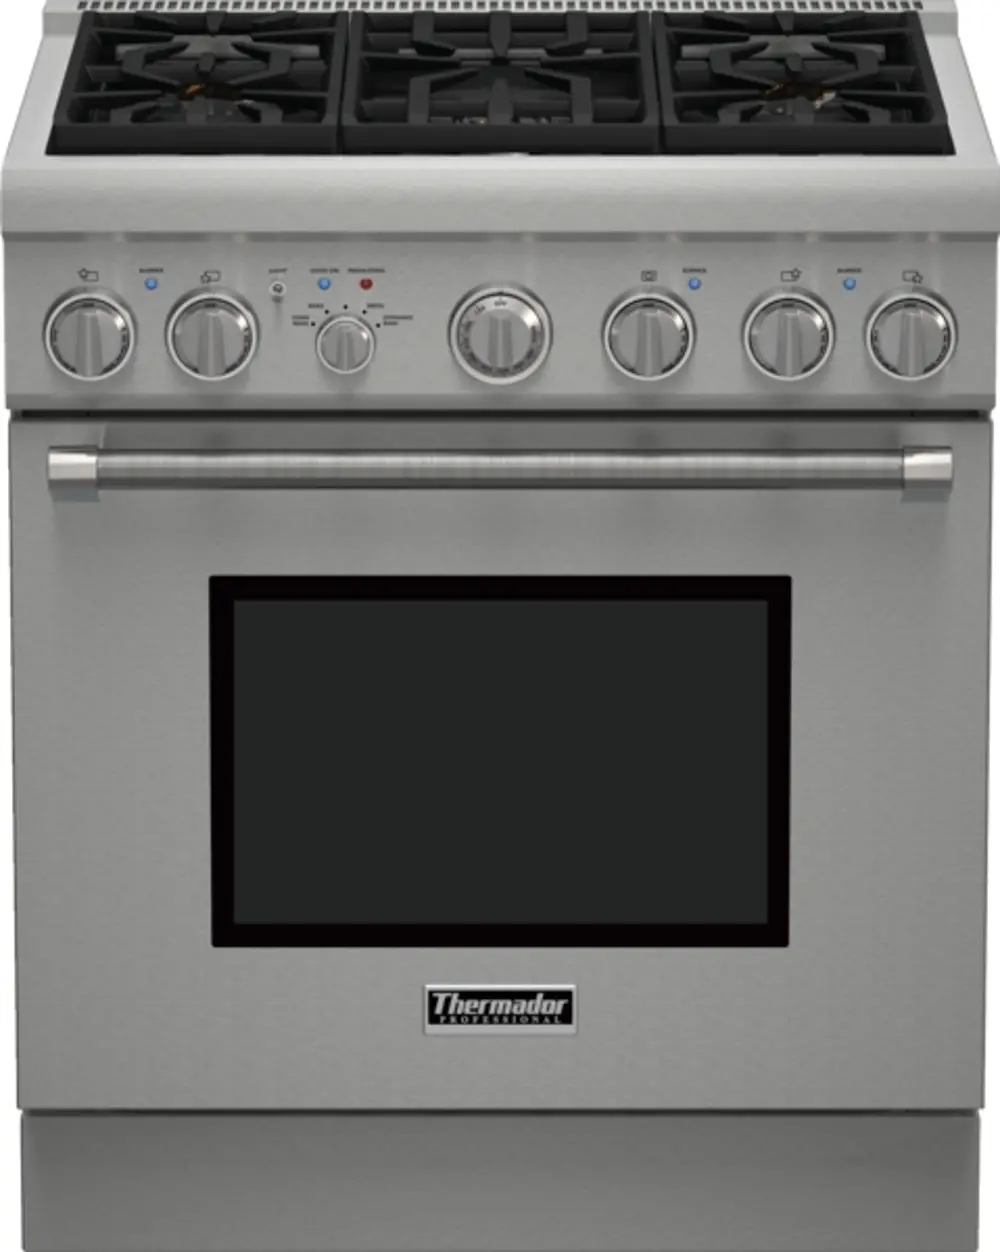 PRG305PH Thermador Gas Range - Stainless Steel-1